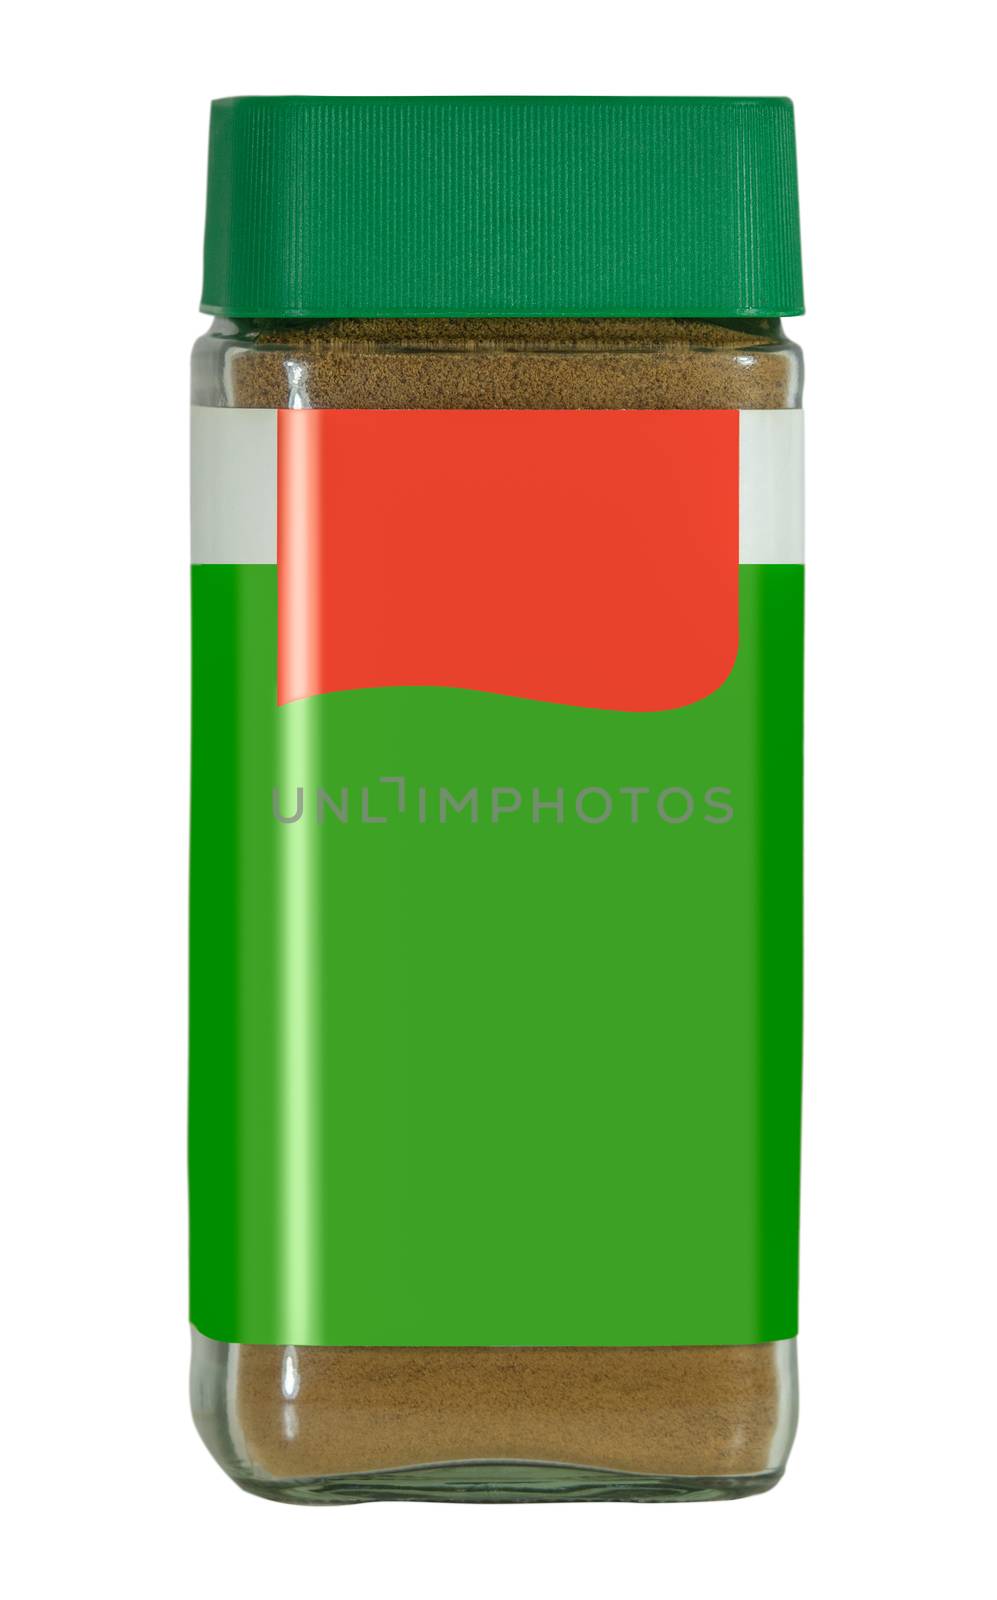 A Retro Style Jar Of Instant Granulated Coffee With A Blank Green And Red Label On A White Background